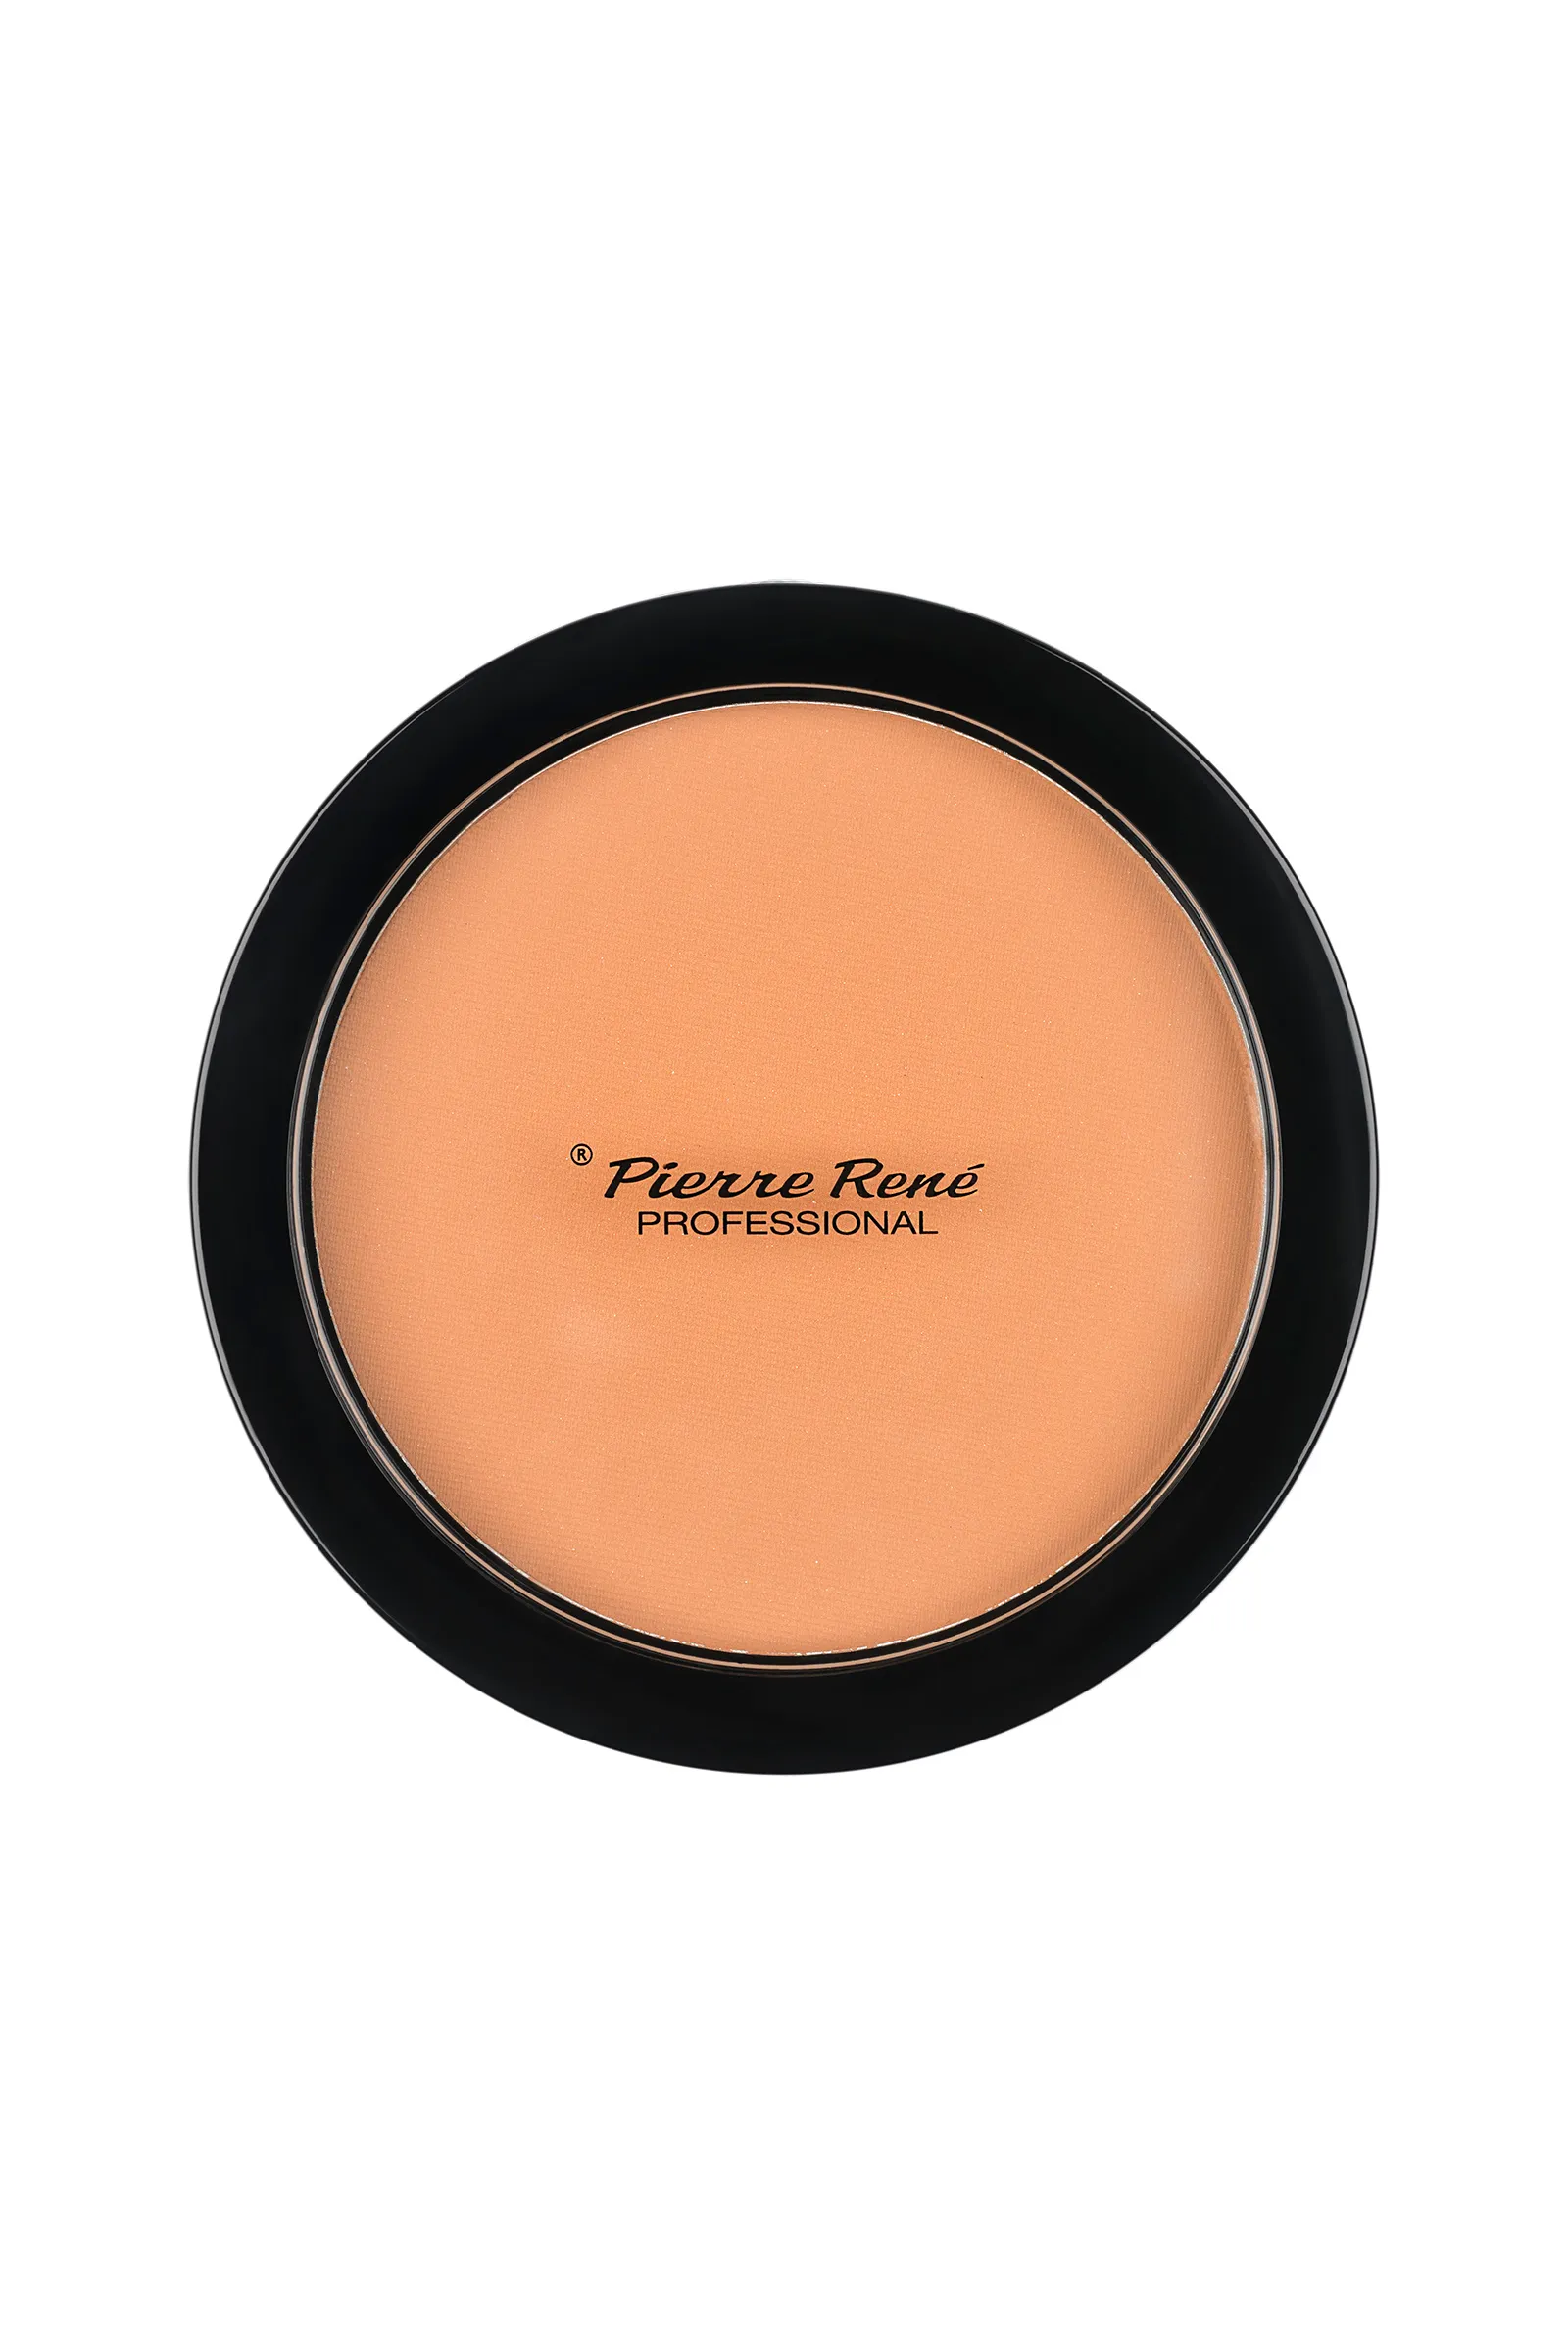 Pierre Rene Professional Compact Powder puder kamienny 06, 8 g